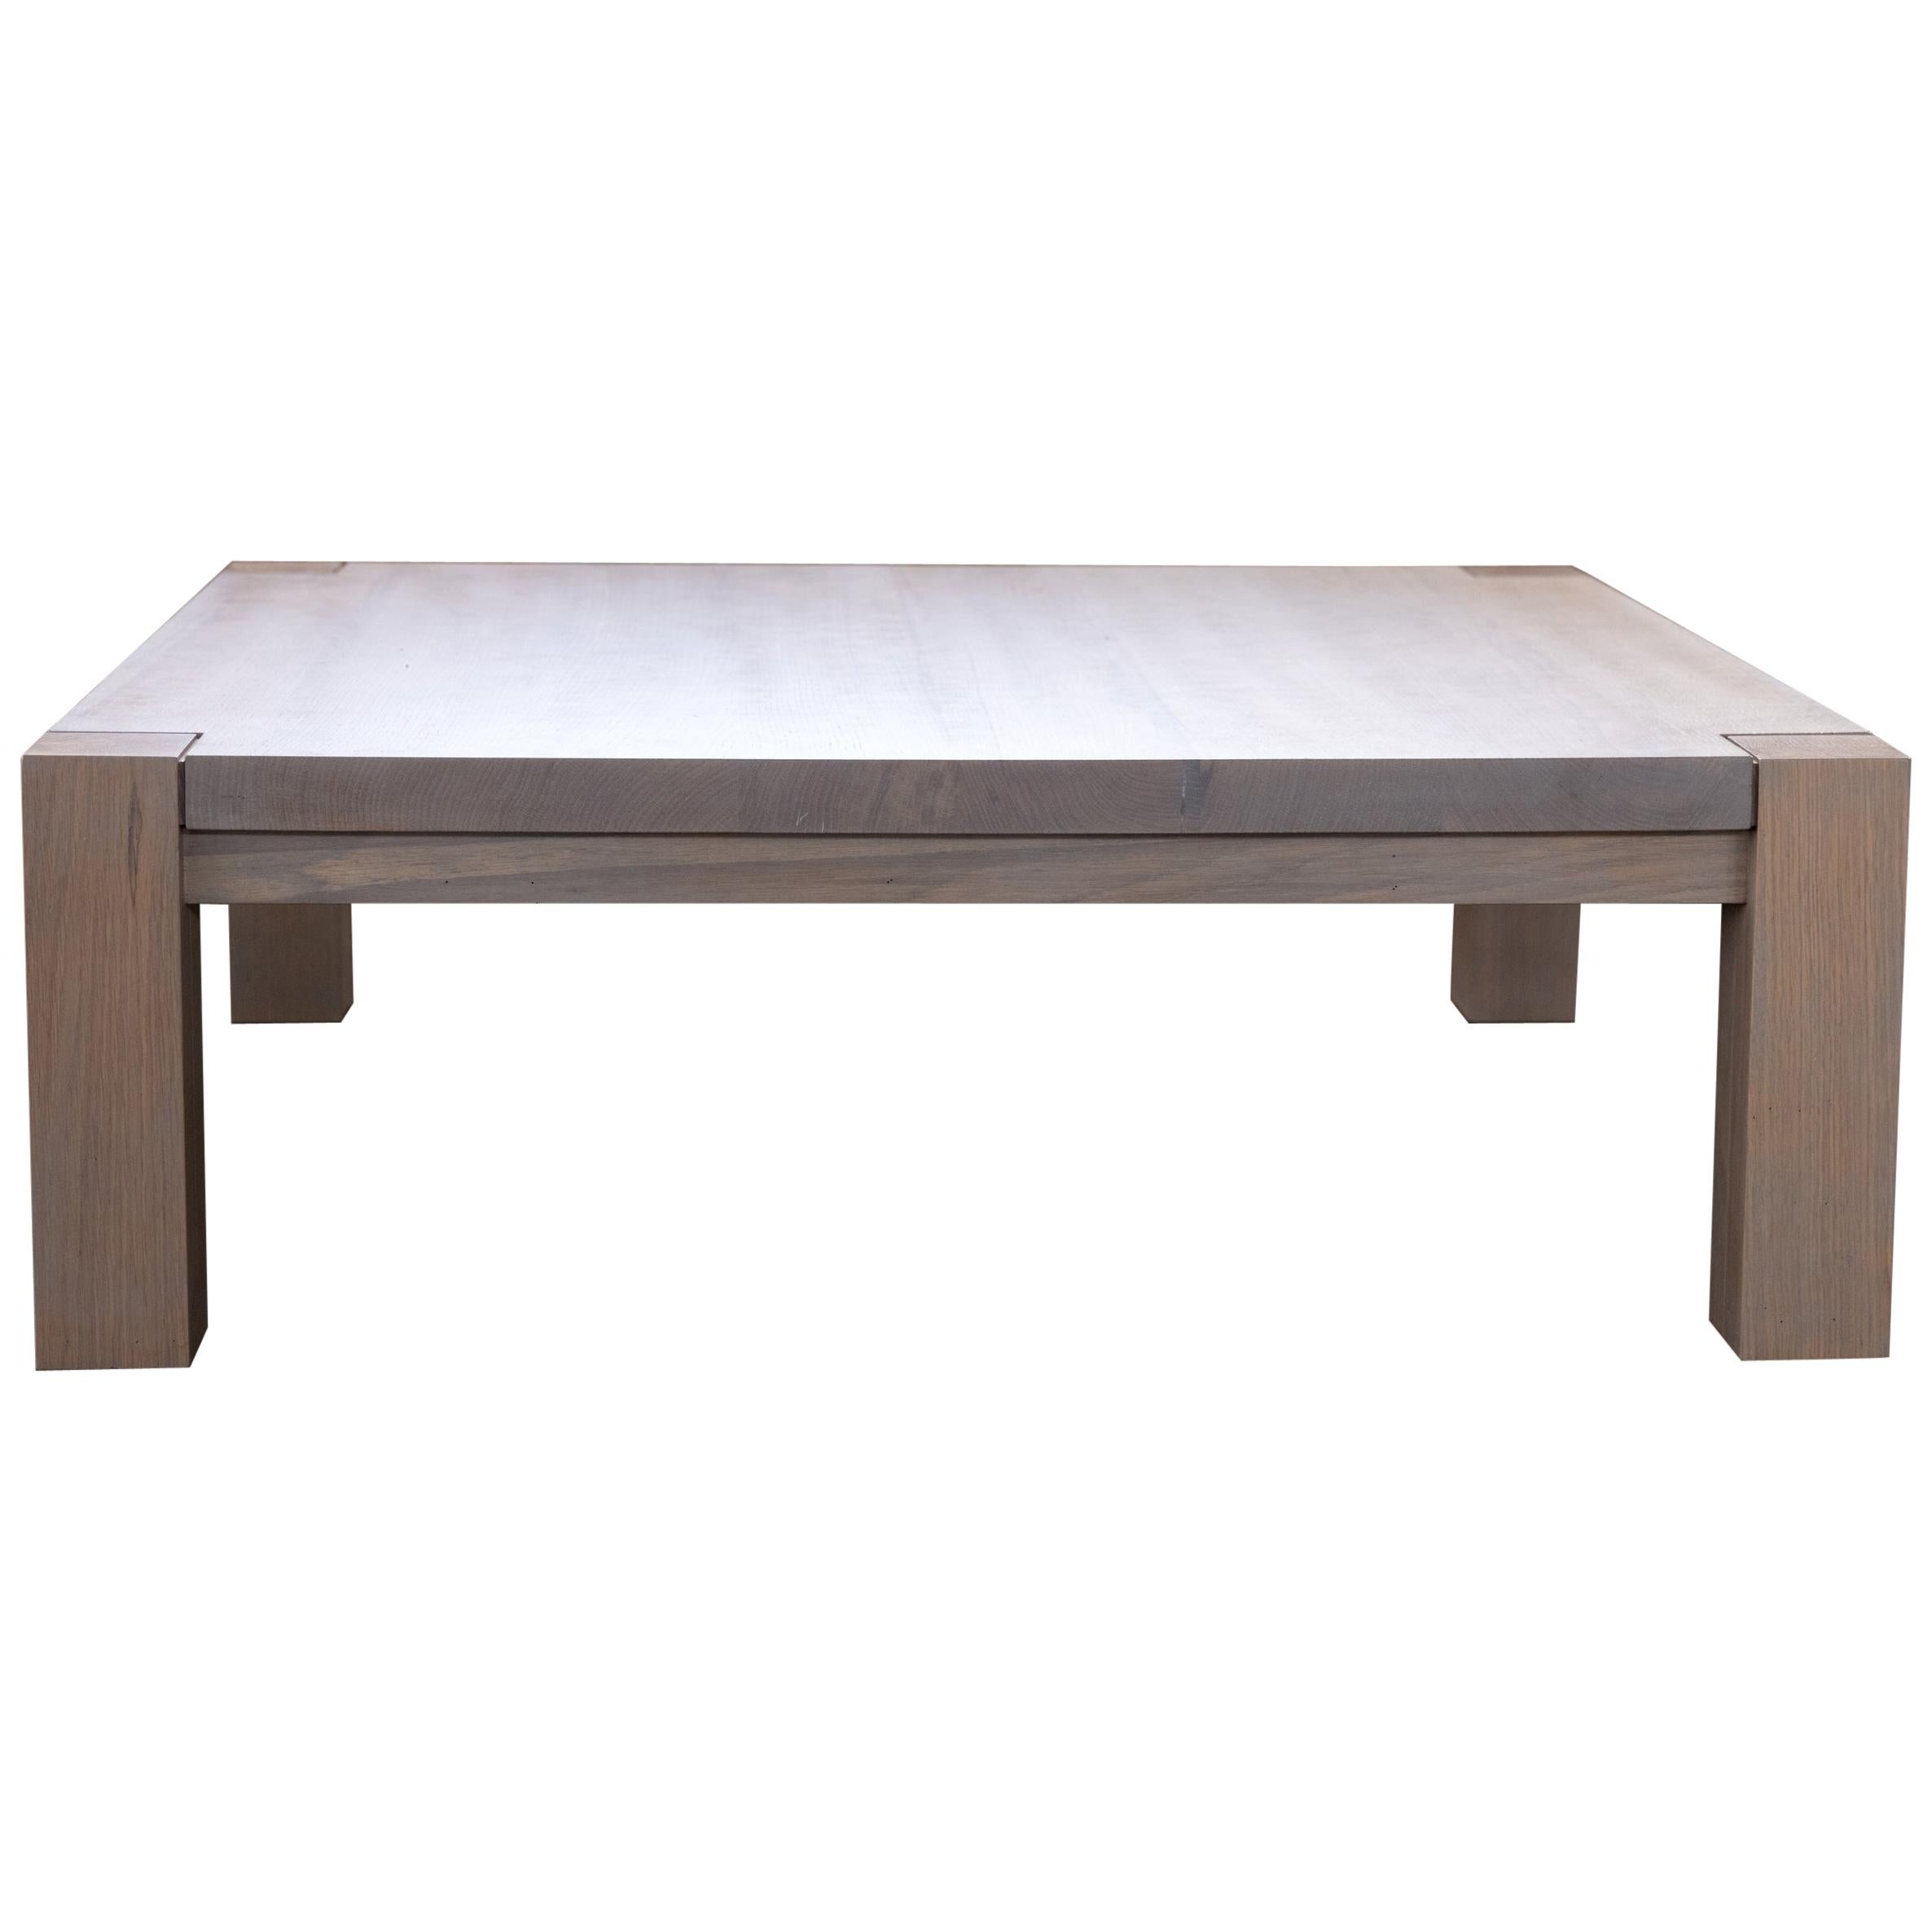 Large Modern Coffee Parsons Style Table in Rustic Oak with Grey Stain